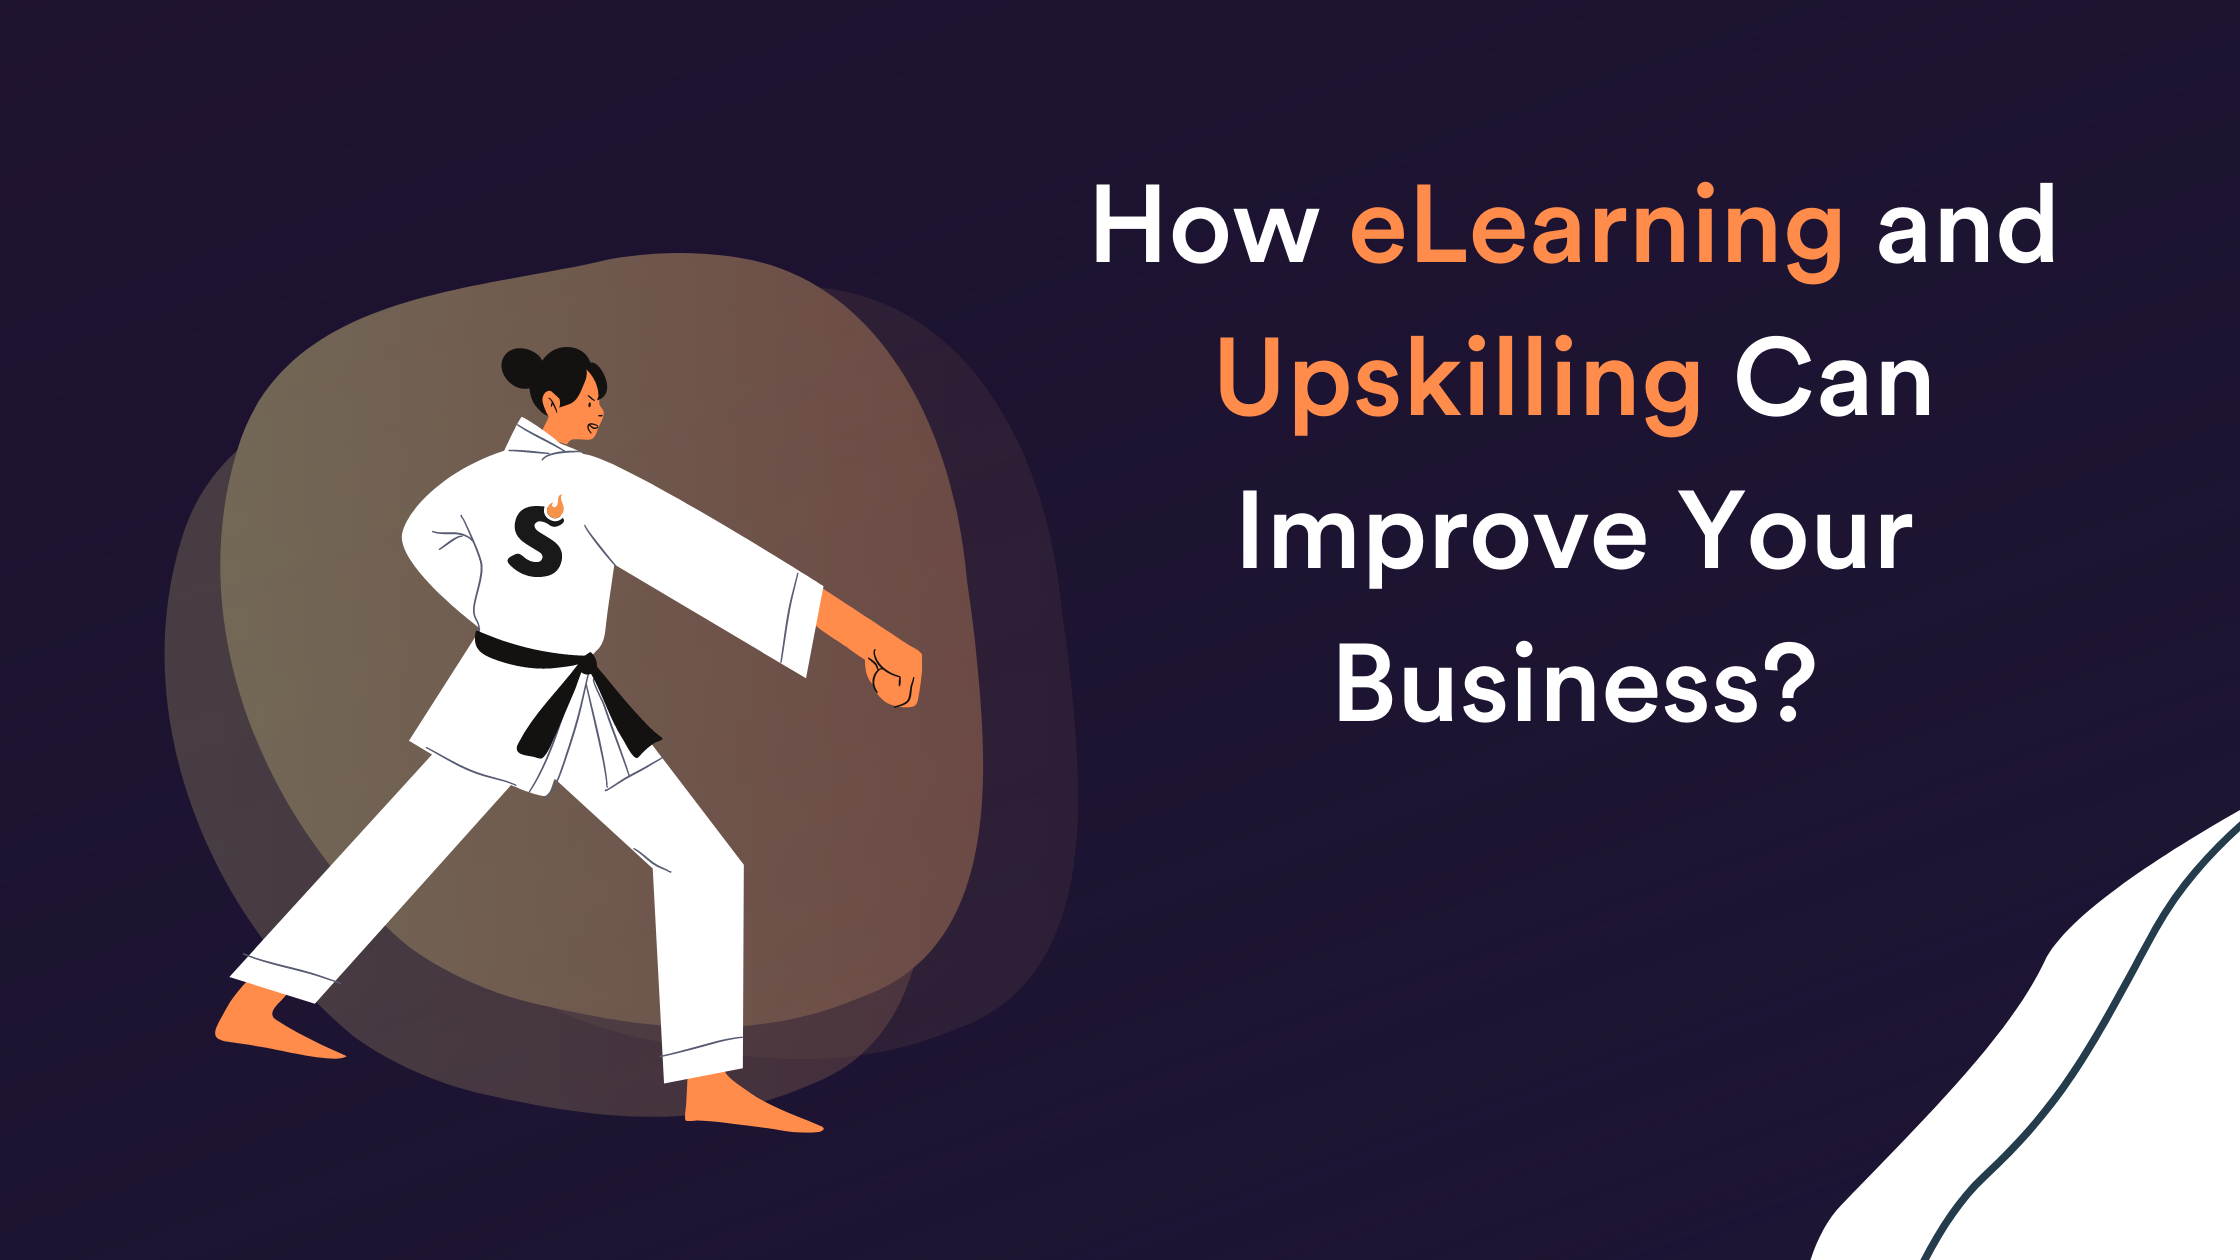 How eLearning and Upskilling Can Improve Your Business?